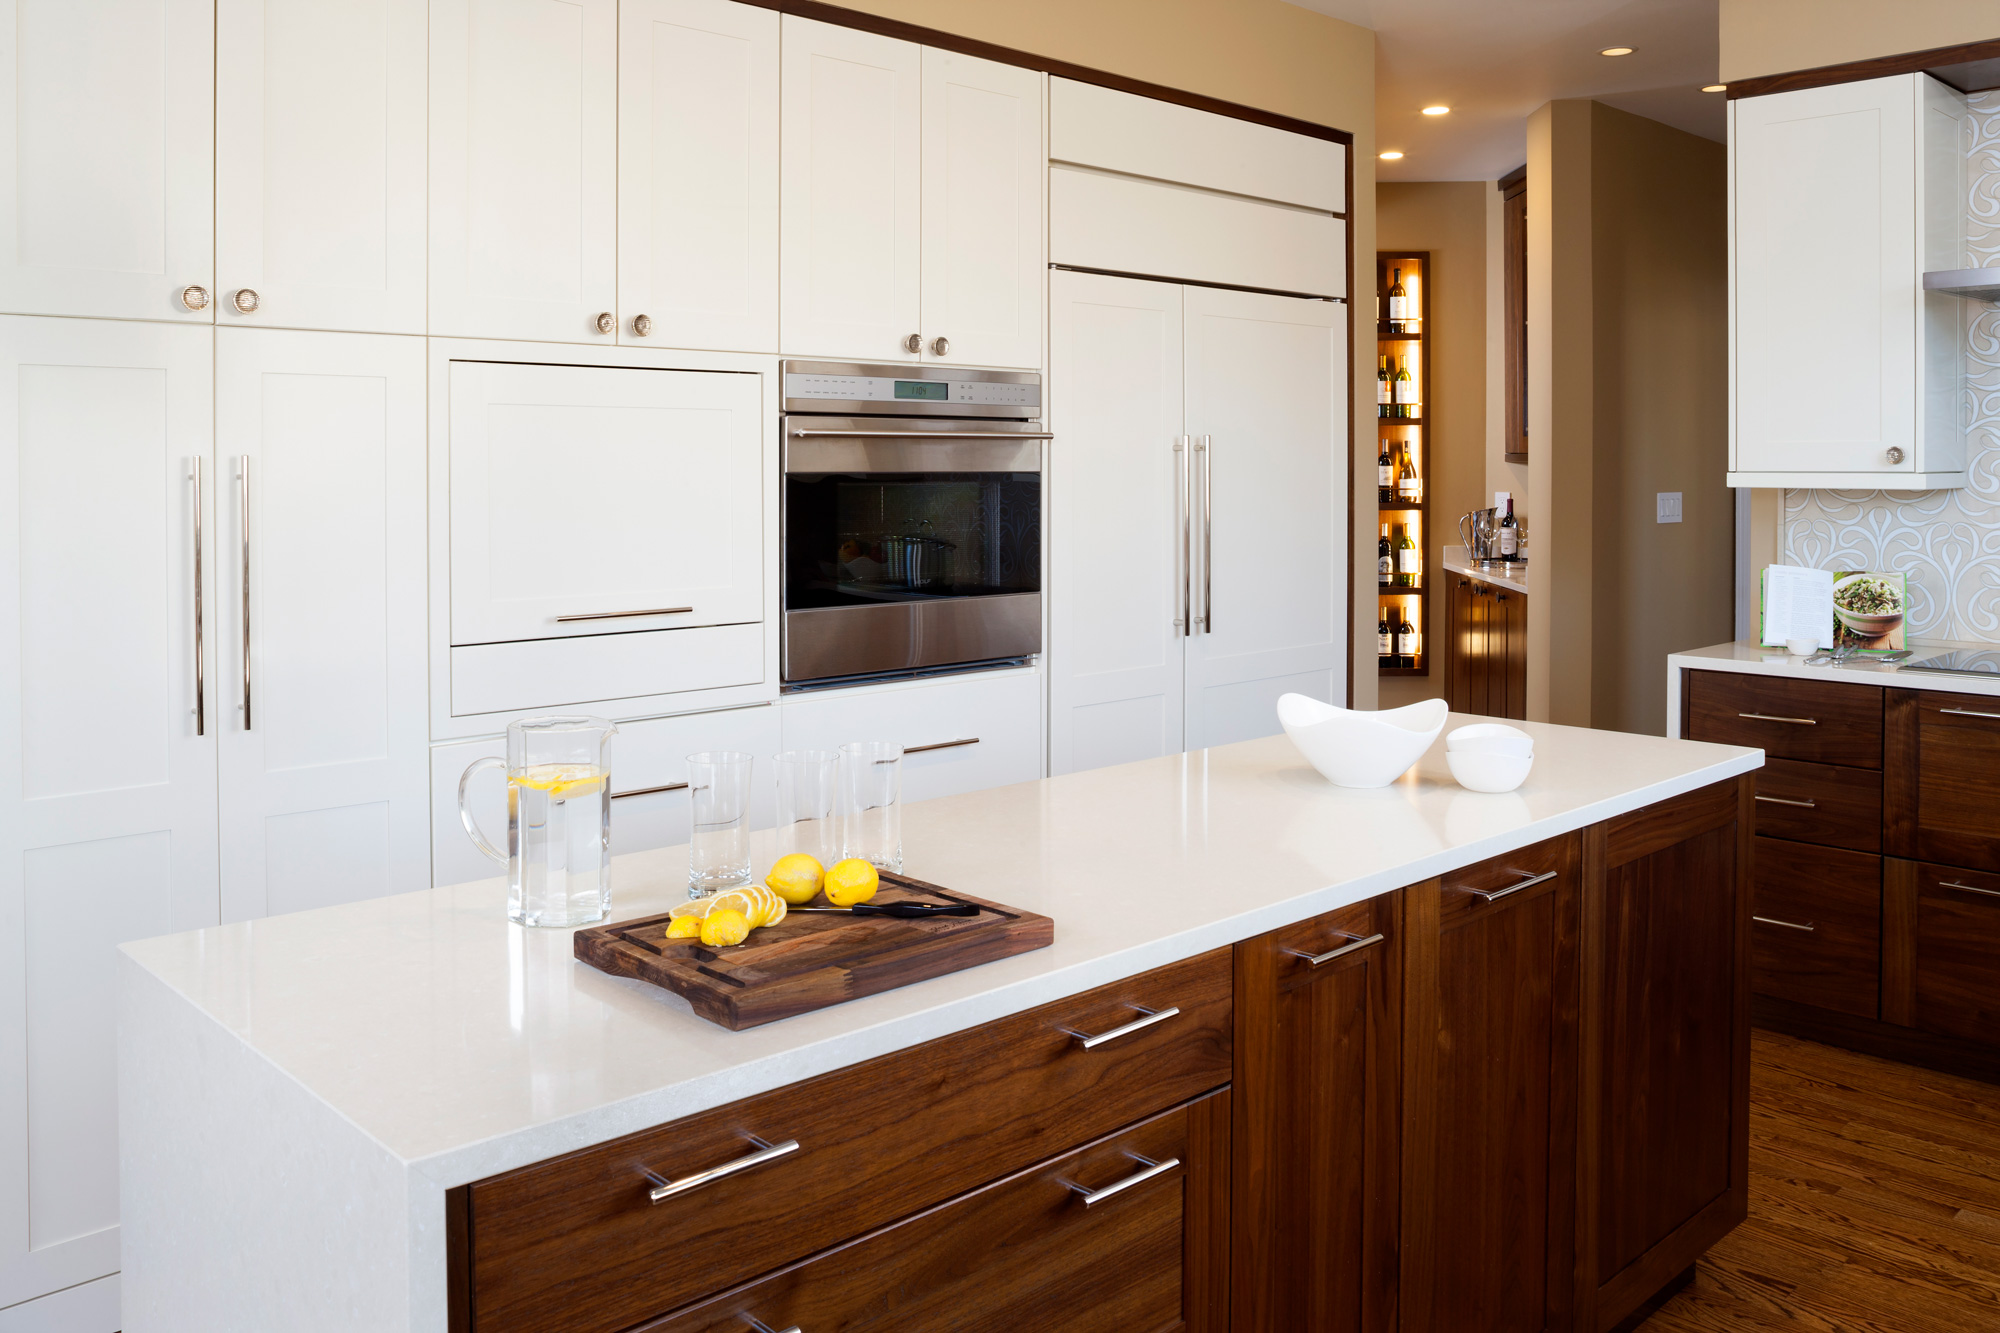 Traditional Kitchen Design | Rutt Quality Cabinetry